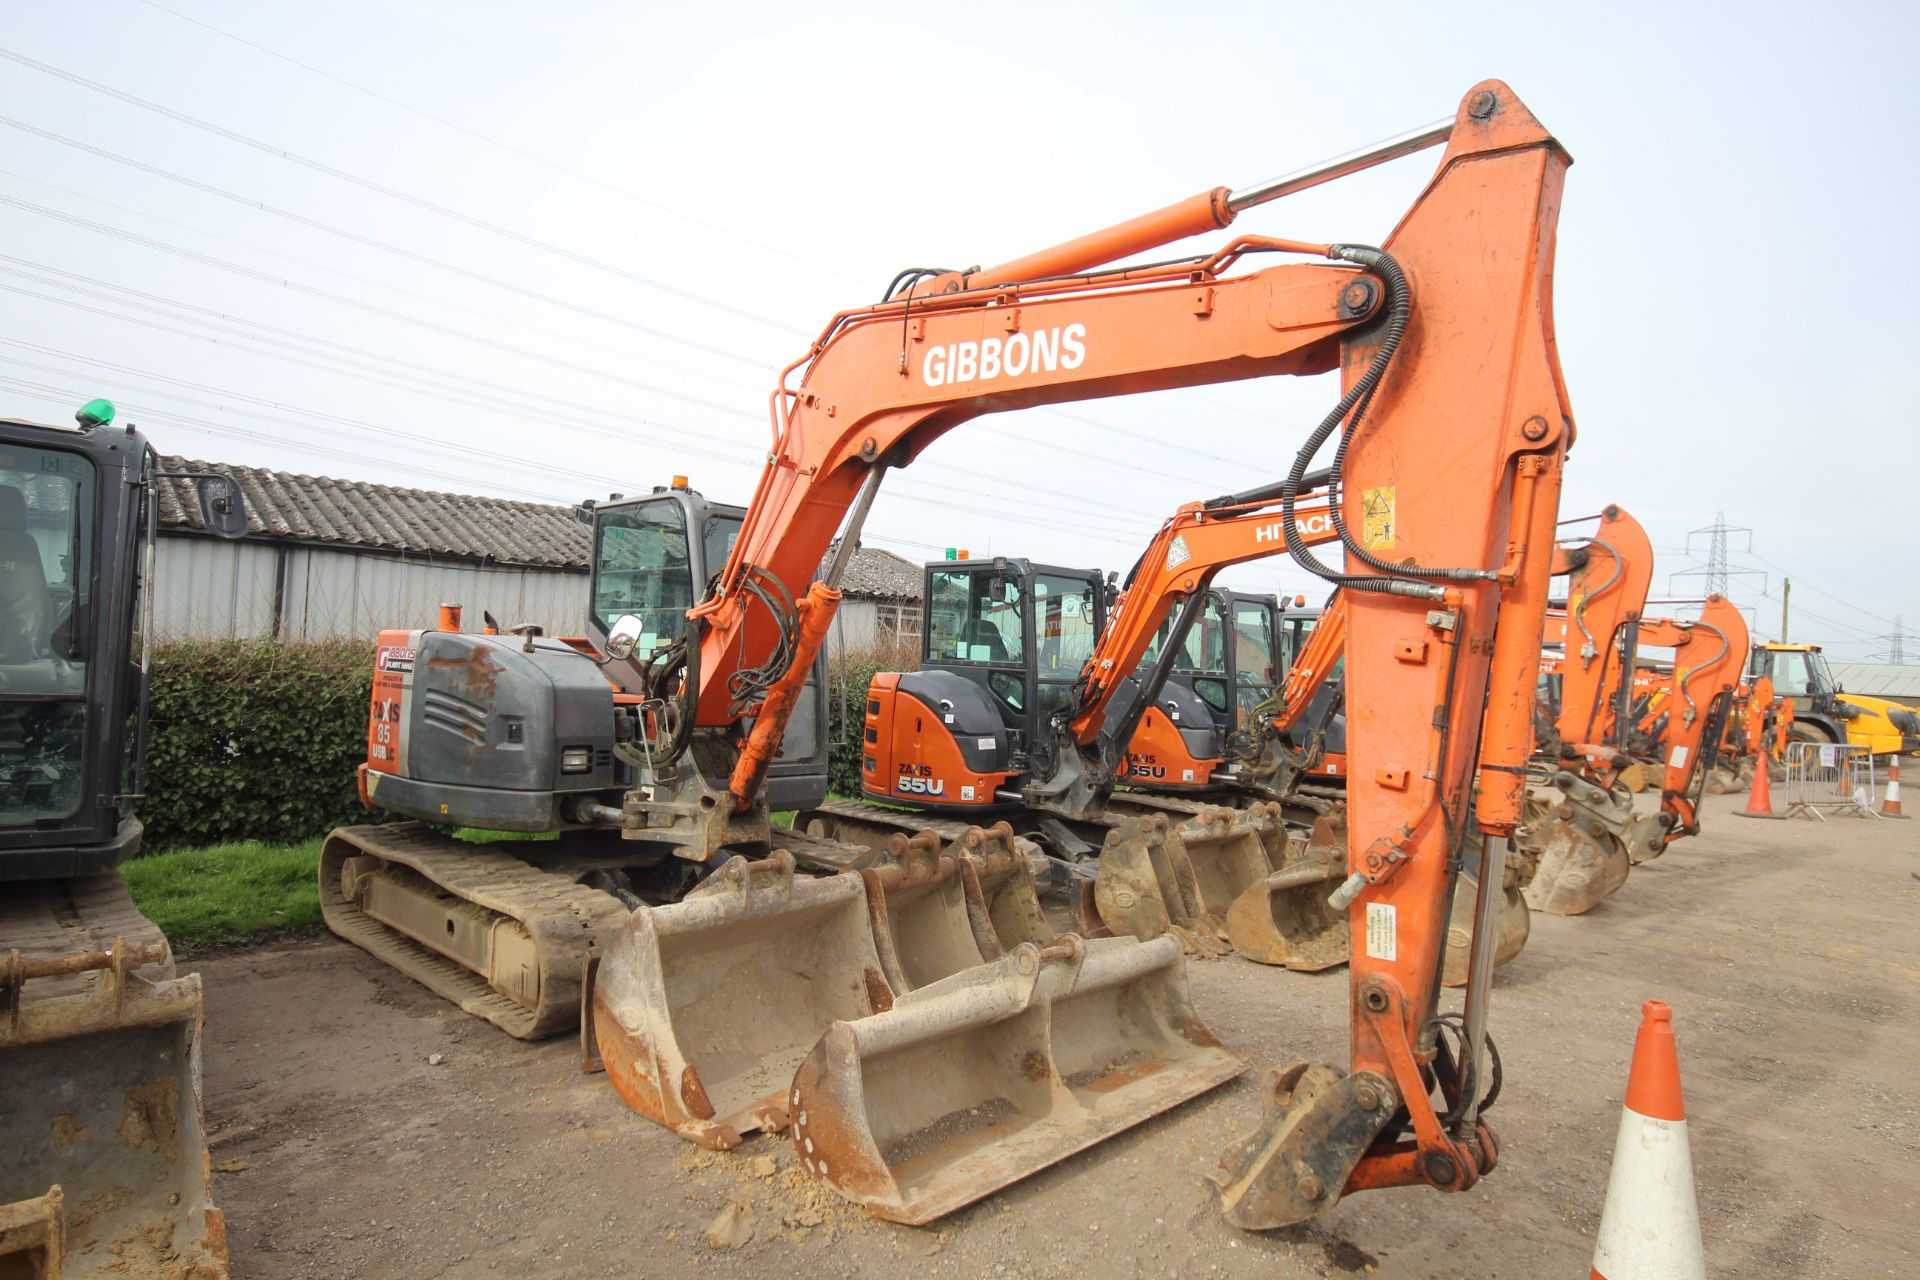 Hitachi Z-Axis 85-USB LC-3 8.5T rubber track excavator. 2012. 7,217 hours. Serial number HCM